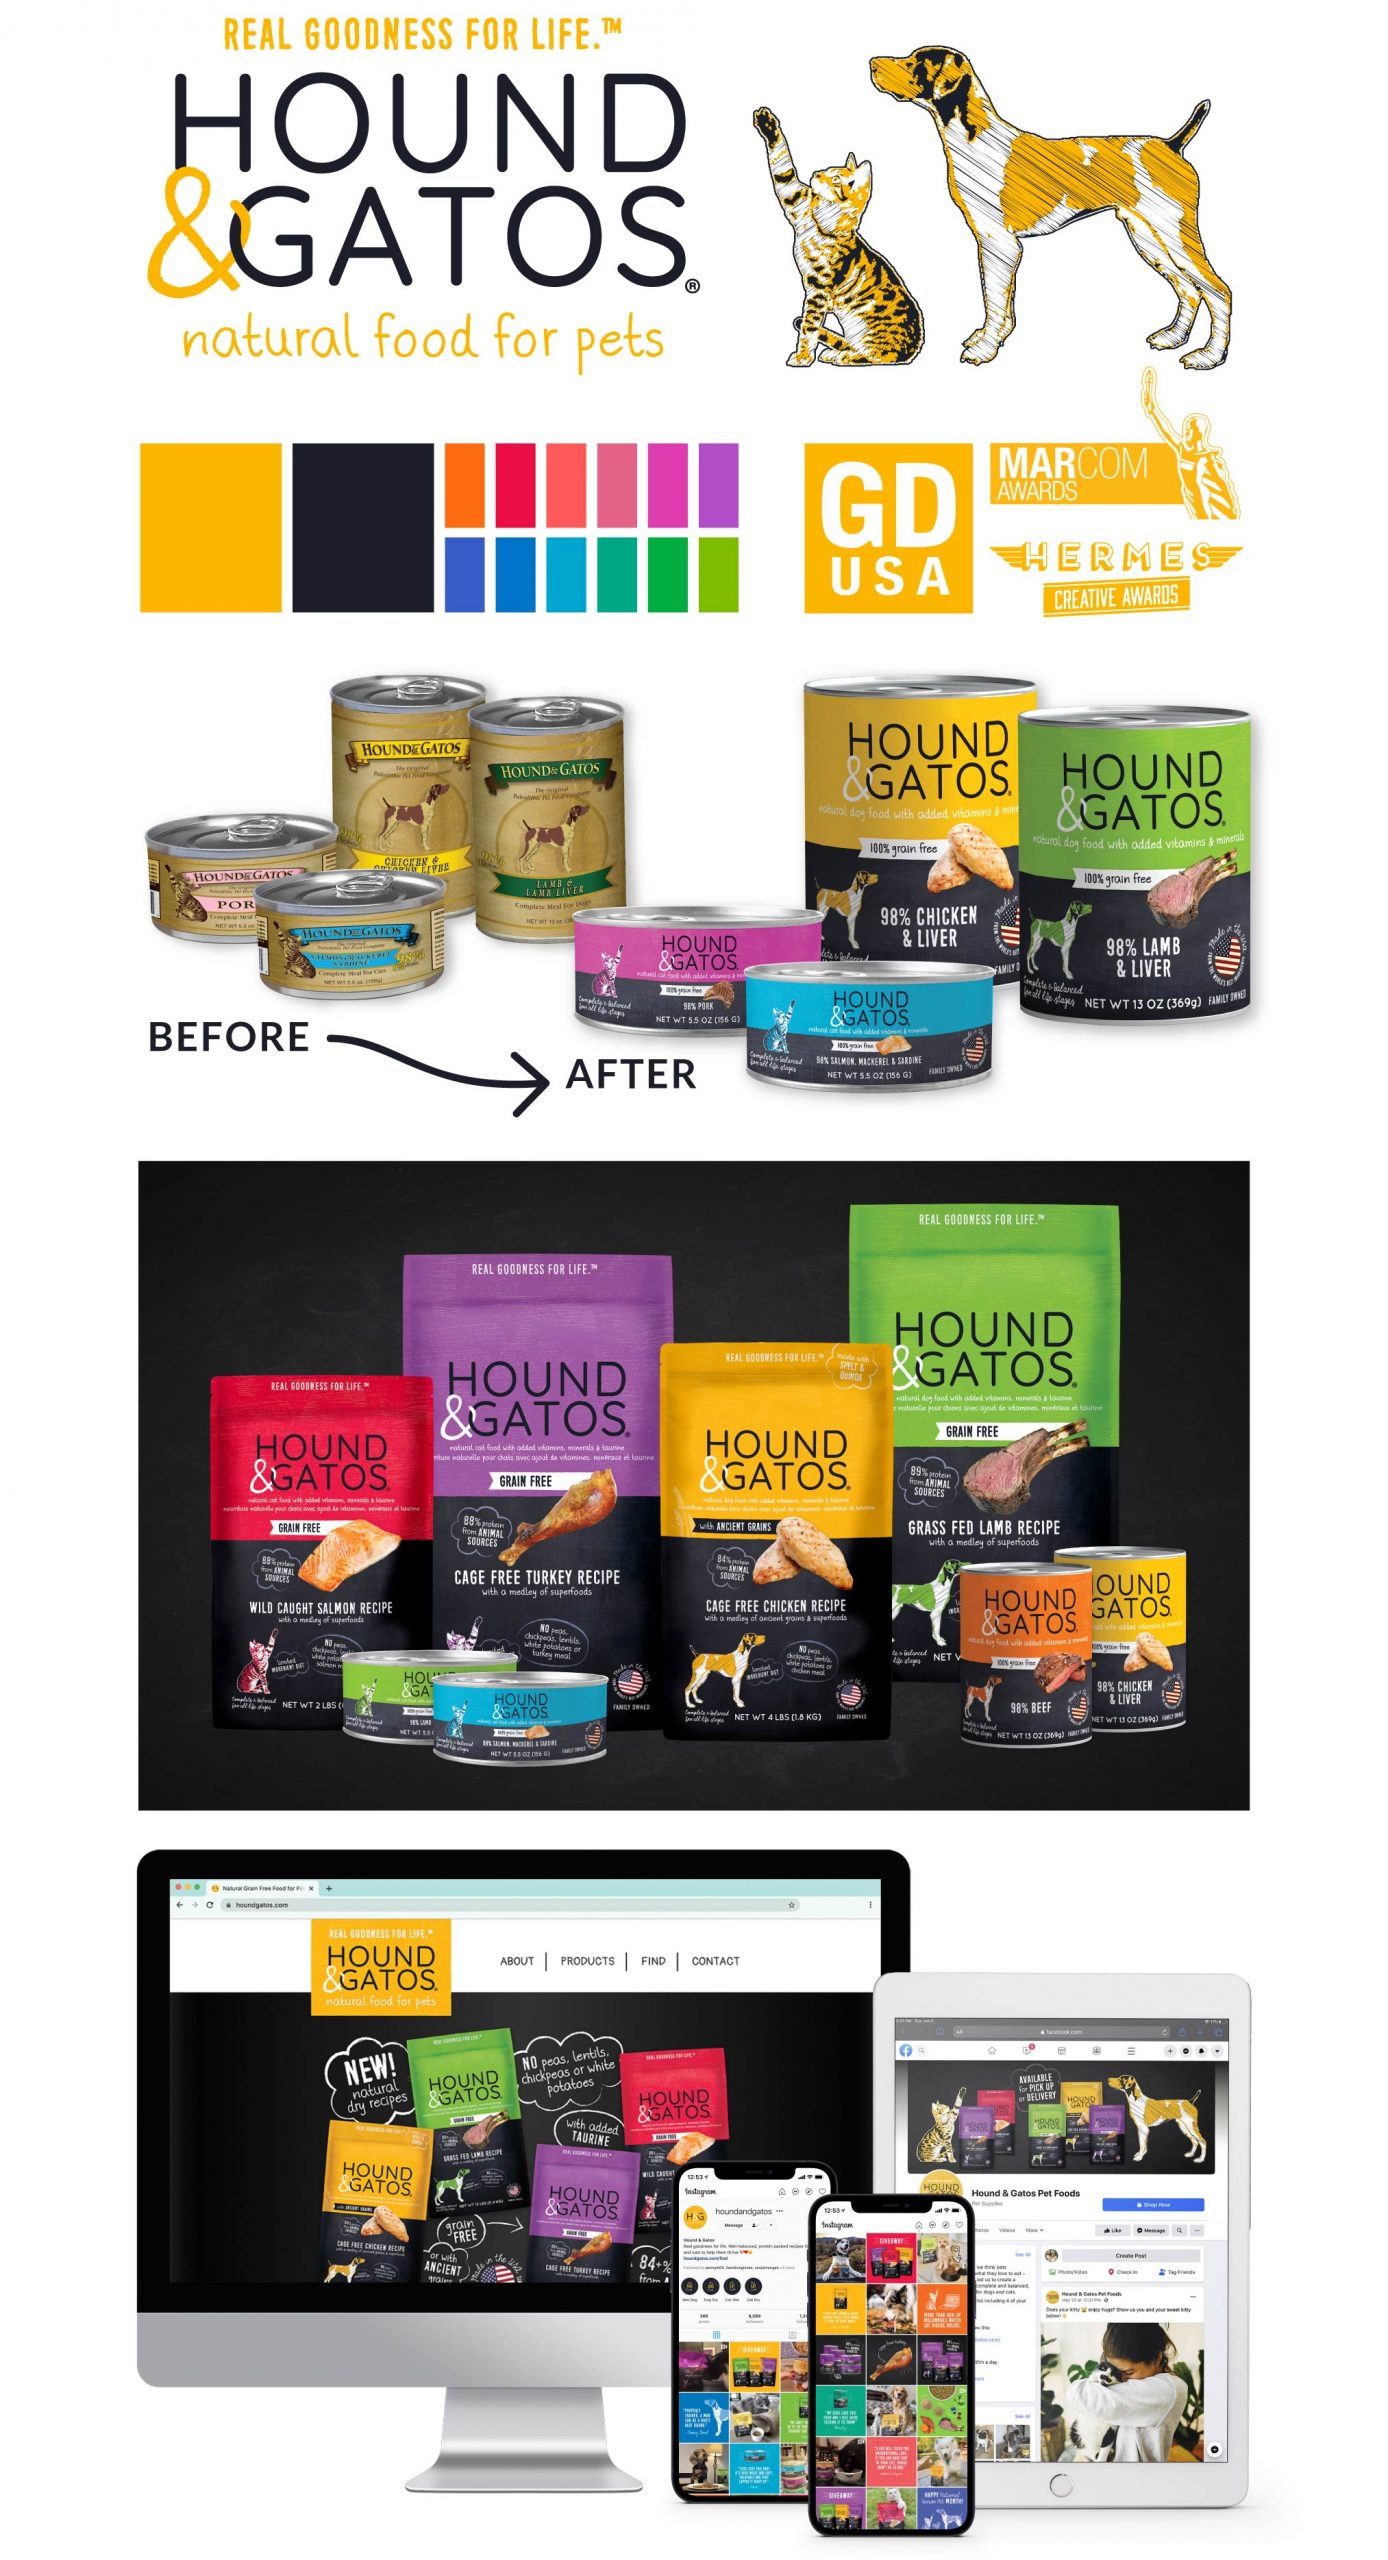 Hound & Gatos redesigne graphics and logo for wet and dry dog and cat food